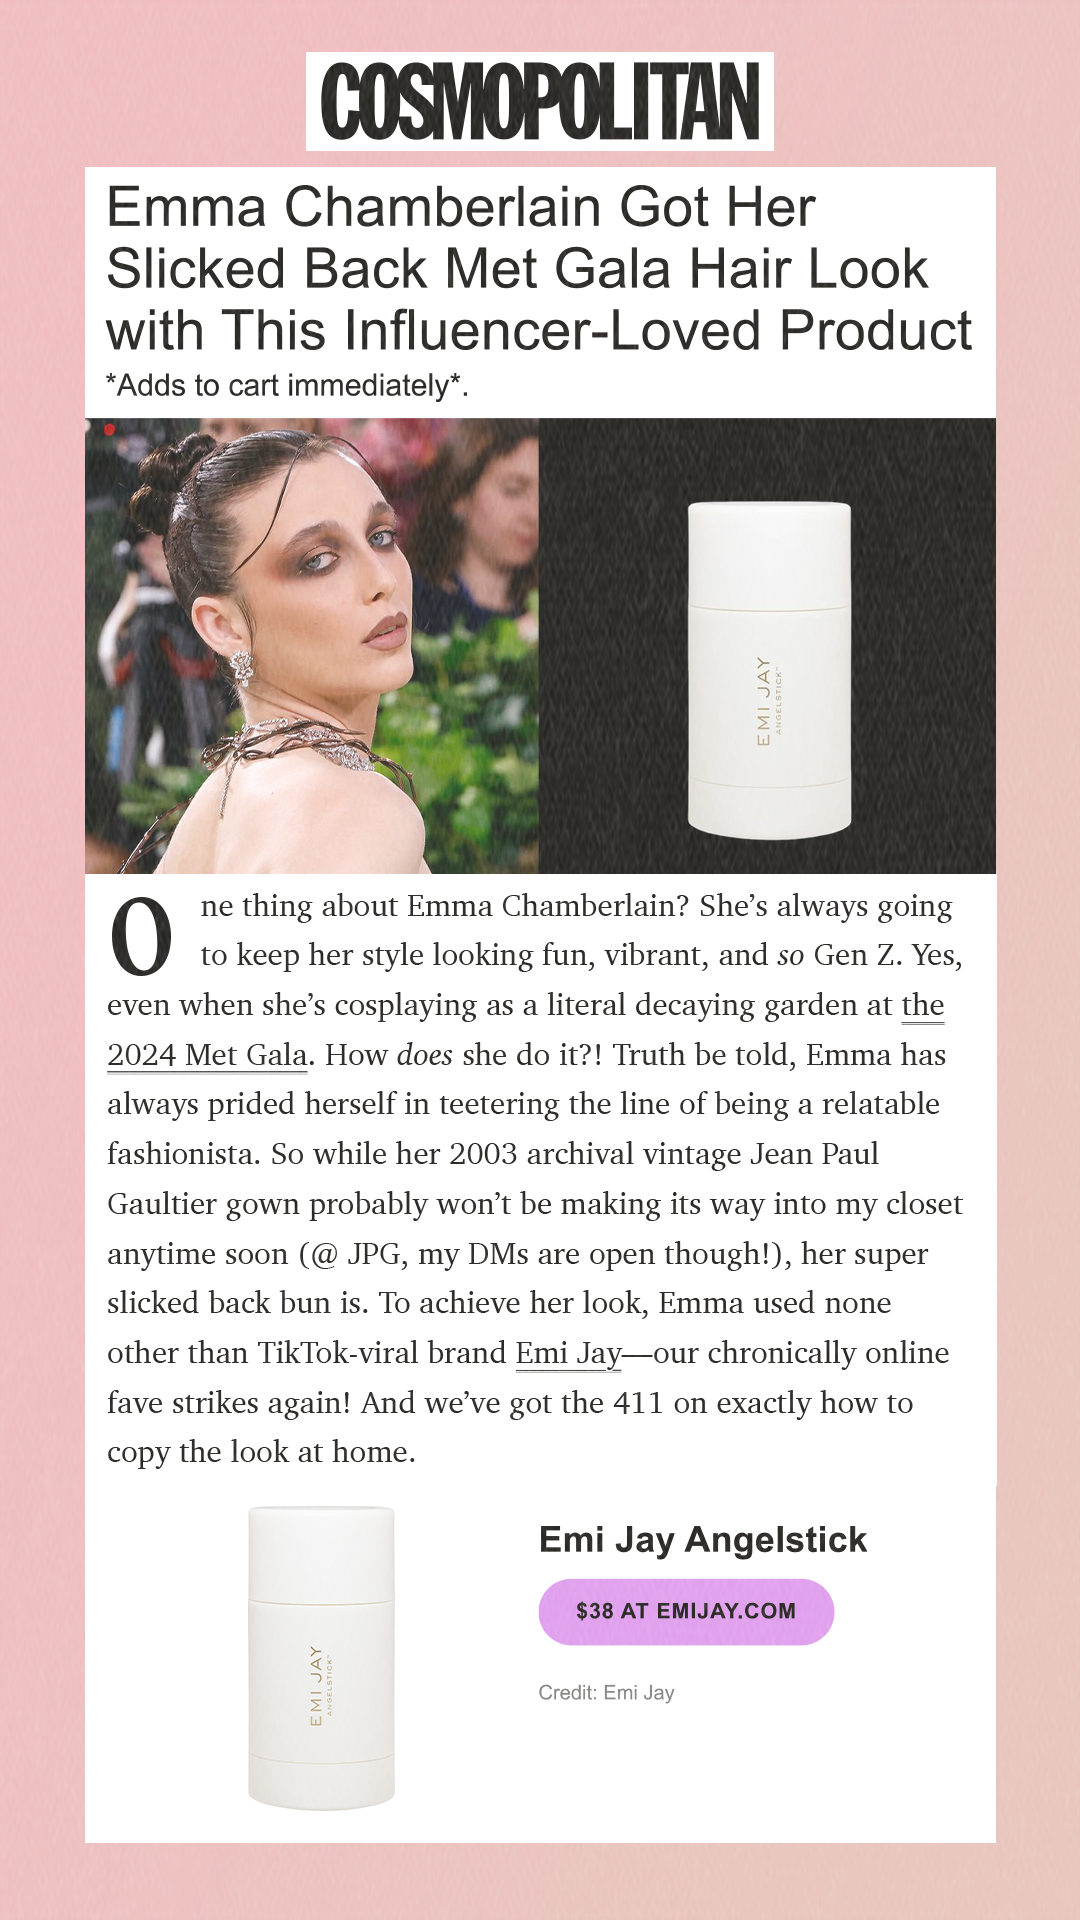 Emma Chamberlain Got Her Slicked Back Met Gala Hair Look with This Influencer-Loved Product *Adds to cart immediately*. One thing about Emma Chamberlain? She’s always going to keep her style looking fun, vibrant, and so Gen Z. Yes, even when she’s cosplaying as a literal decaying garden at the 2024 Met Gala. How does she do it?! Truth be told, Emma has always prided herself in teetering the line of being a relatable fashionista. So while her 2003 archival vintage Jean Paul Gaultier gown probably won’t be making its way into my closet anytime soon (@ JPG, my DMs are open though!), her super slicked back bun is. To achieve her look, Emma used none other than TikTok-viral brand Emi Jay—our chronically online fave strikes again! And we’ve got the 411 on exactly how to copy the look at home. Emi Jay Angelstick$38 at emijay.comCredit: Emi Jay